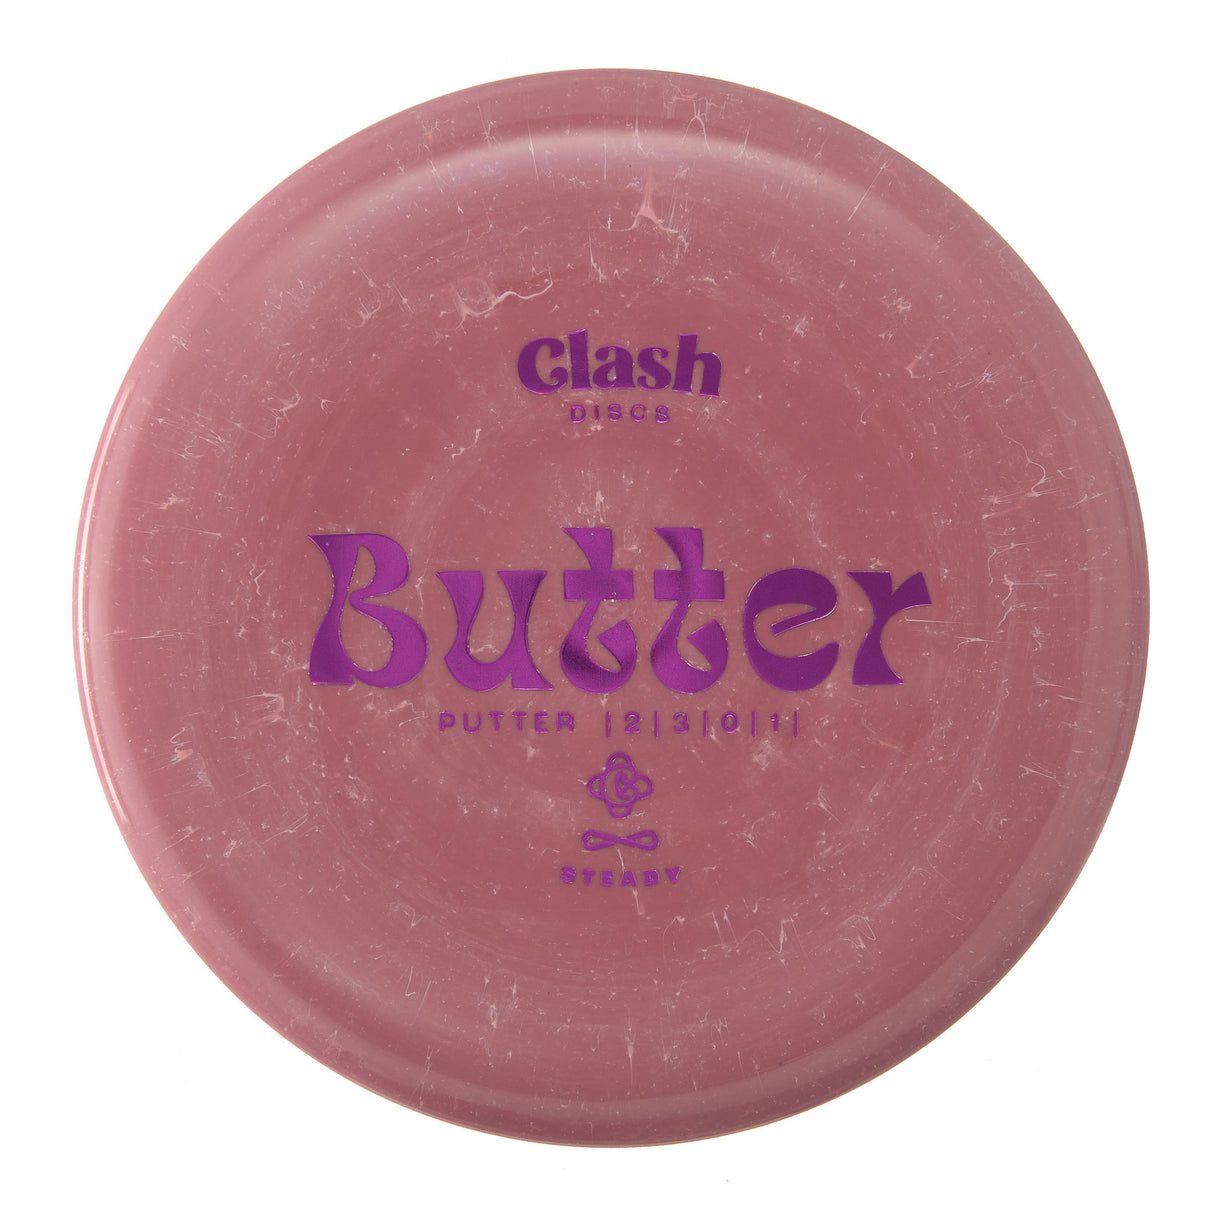 Clash Discs Butter - Steady  175g | Style 0011